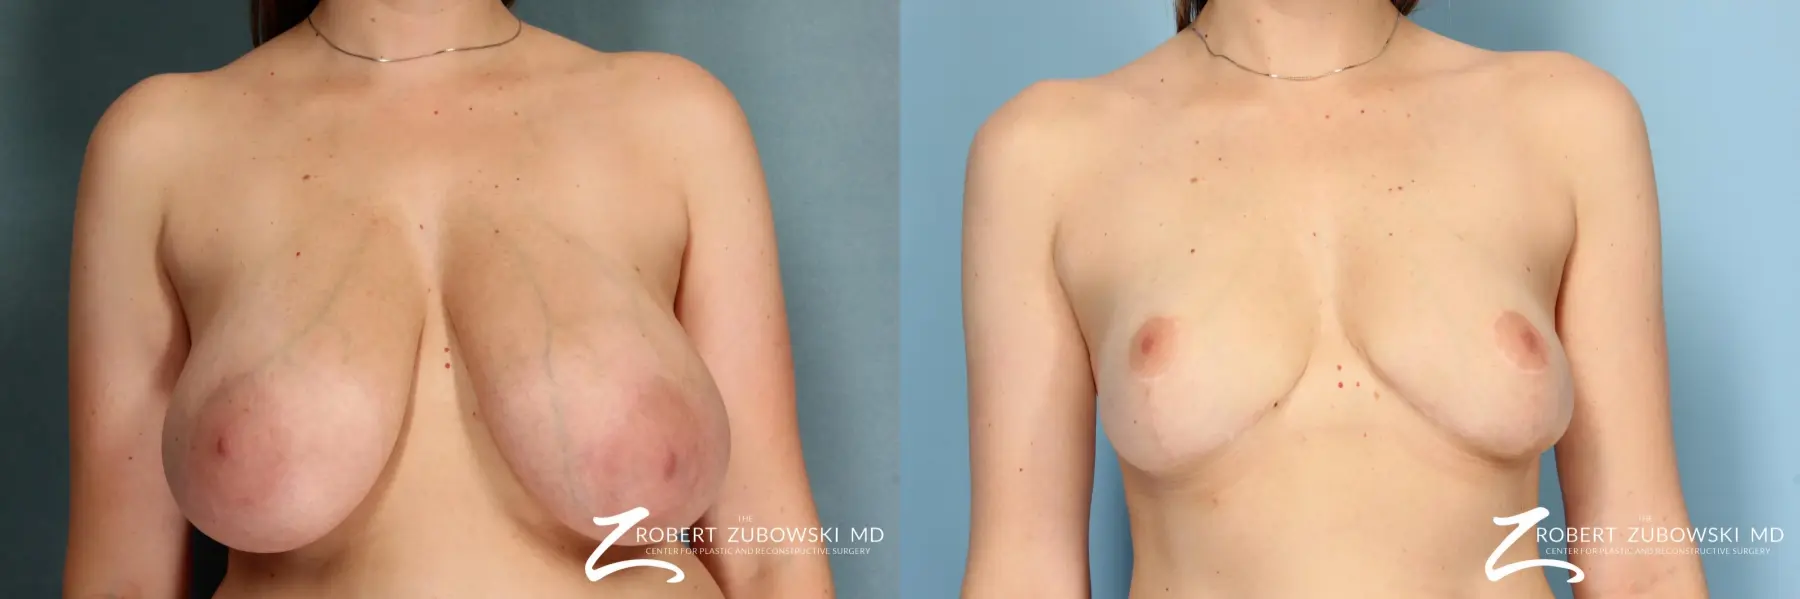 Breast Lift And Augmentation: Patient 10 - Before and After  